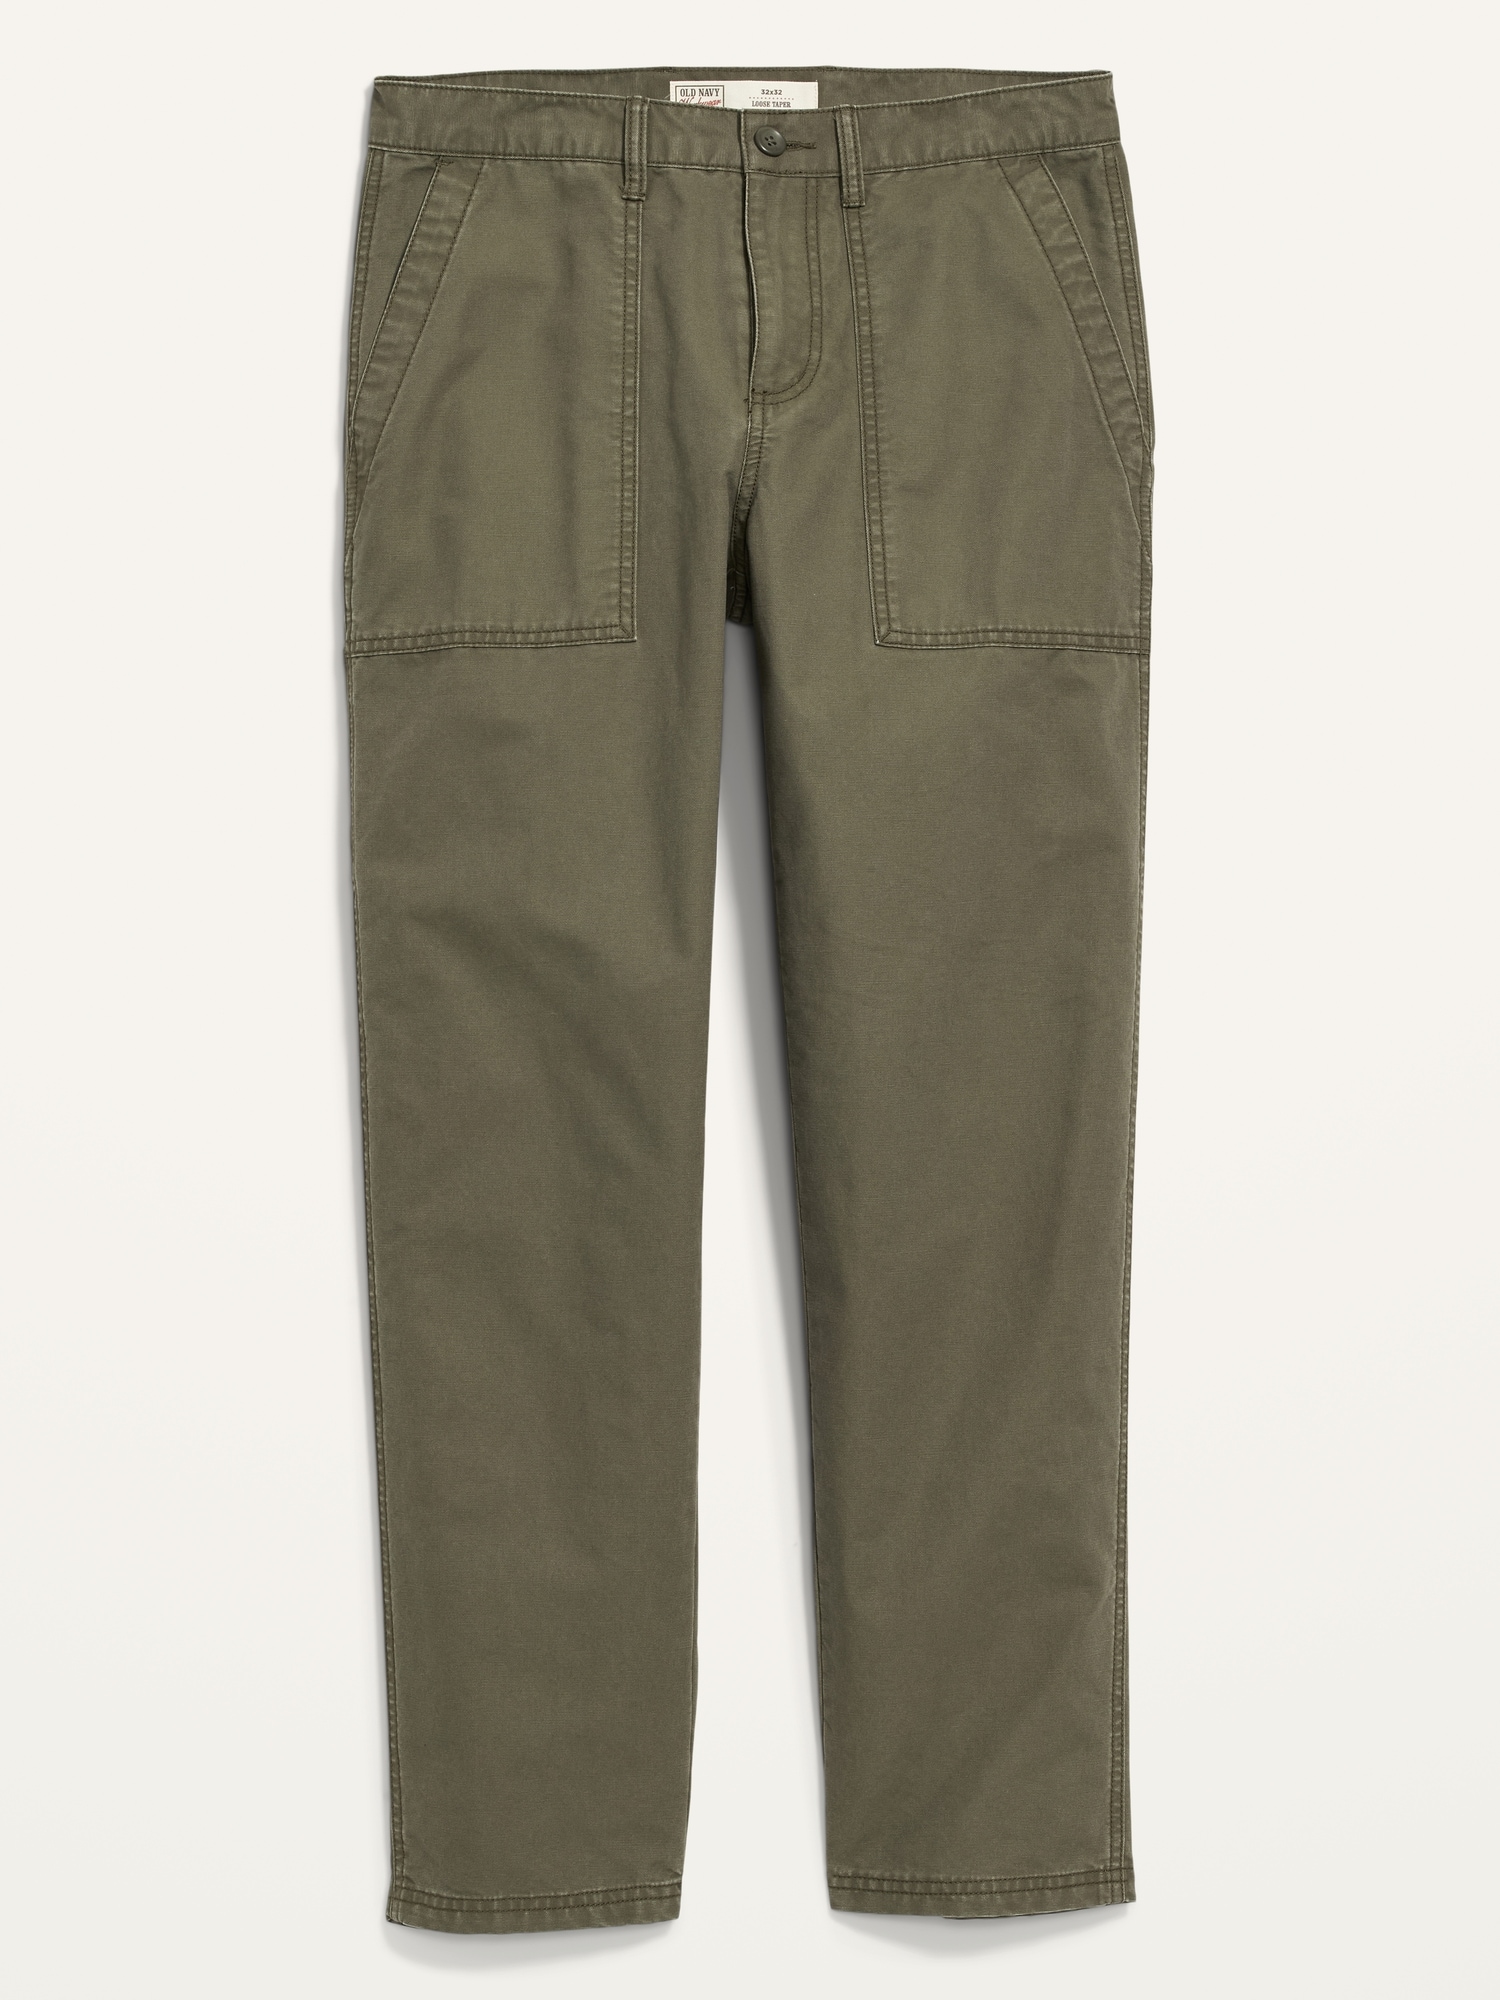 Loose Taper Non-Stretch Canvas Workwear Pants | Old Navy